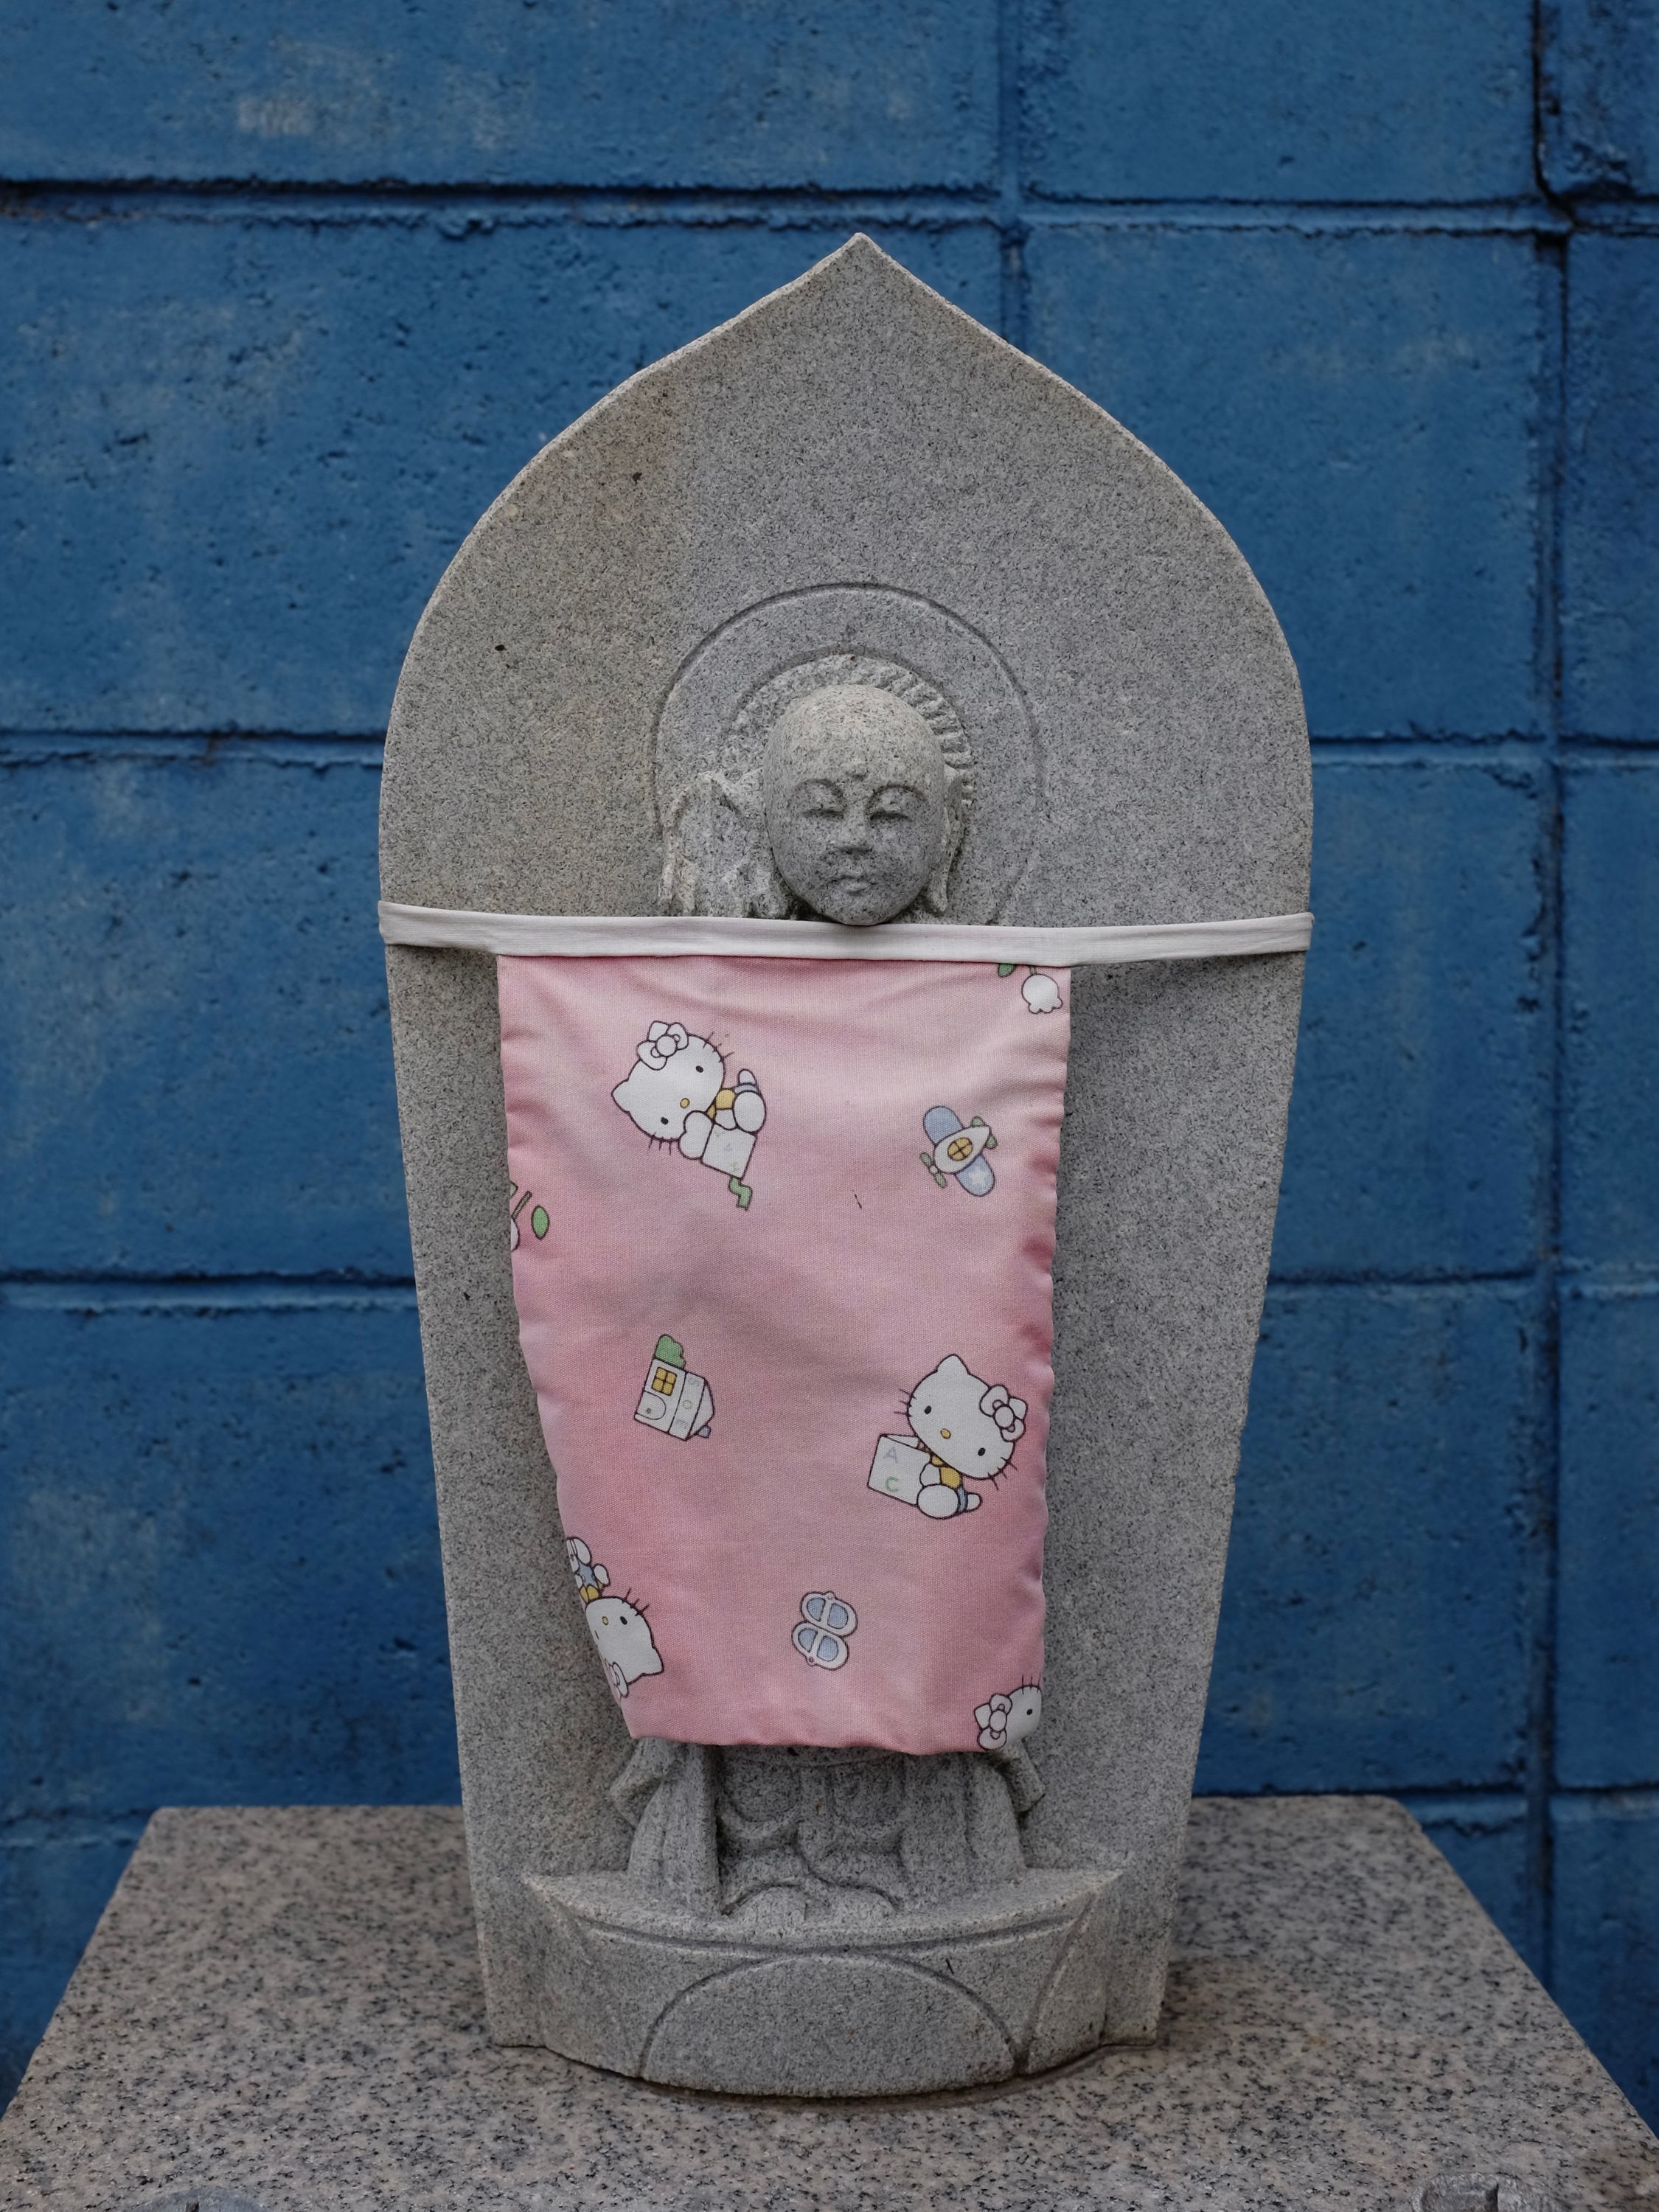 A Buddhist statue wearing a pink apron with a Hello Kitty pattern stands against a blue wall.